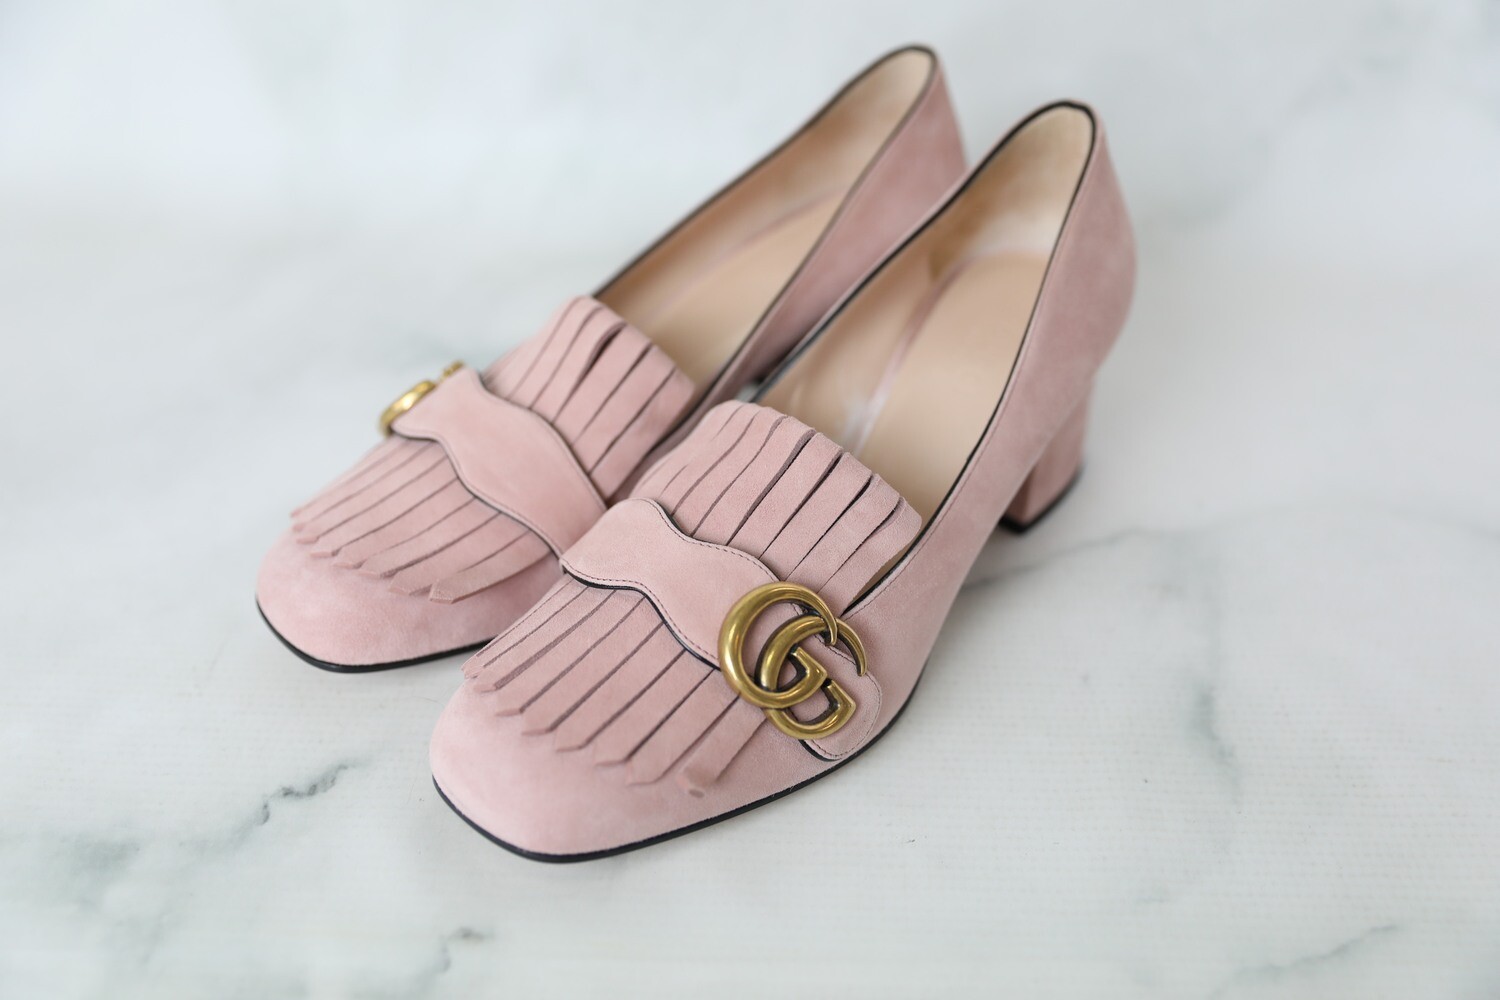 Gucci, Shoes, Gucci Gg Marmont Malaga Kid Pink Leather Womens Loafers